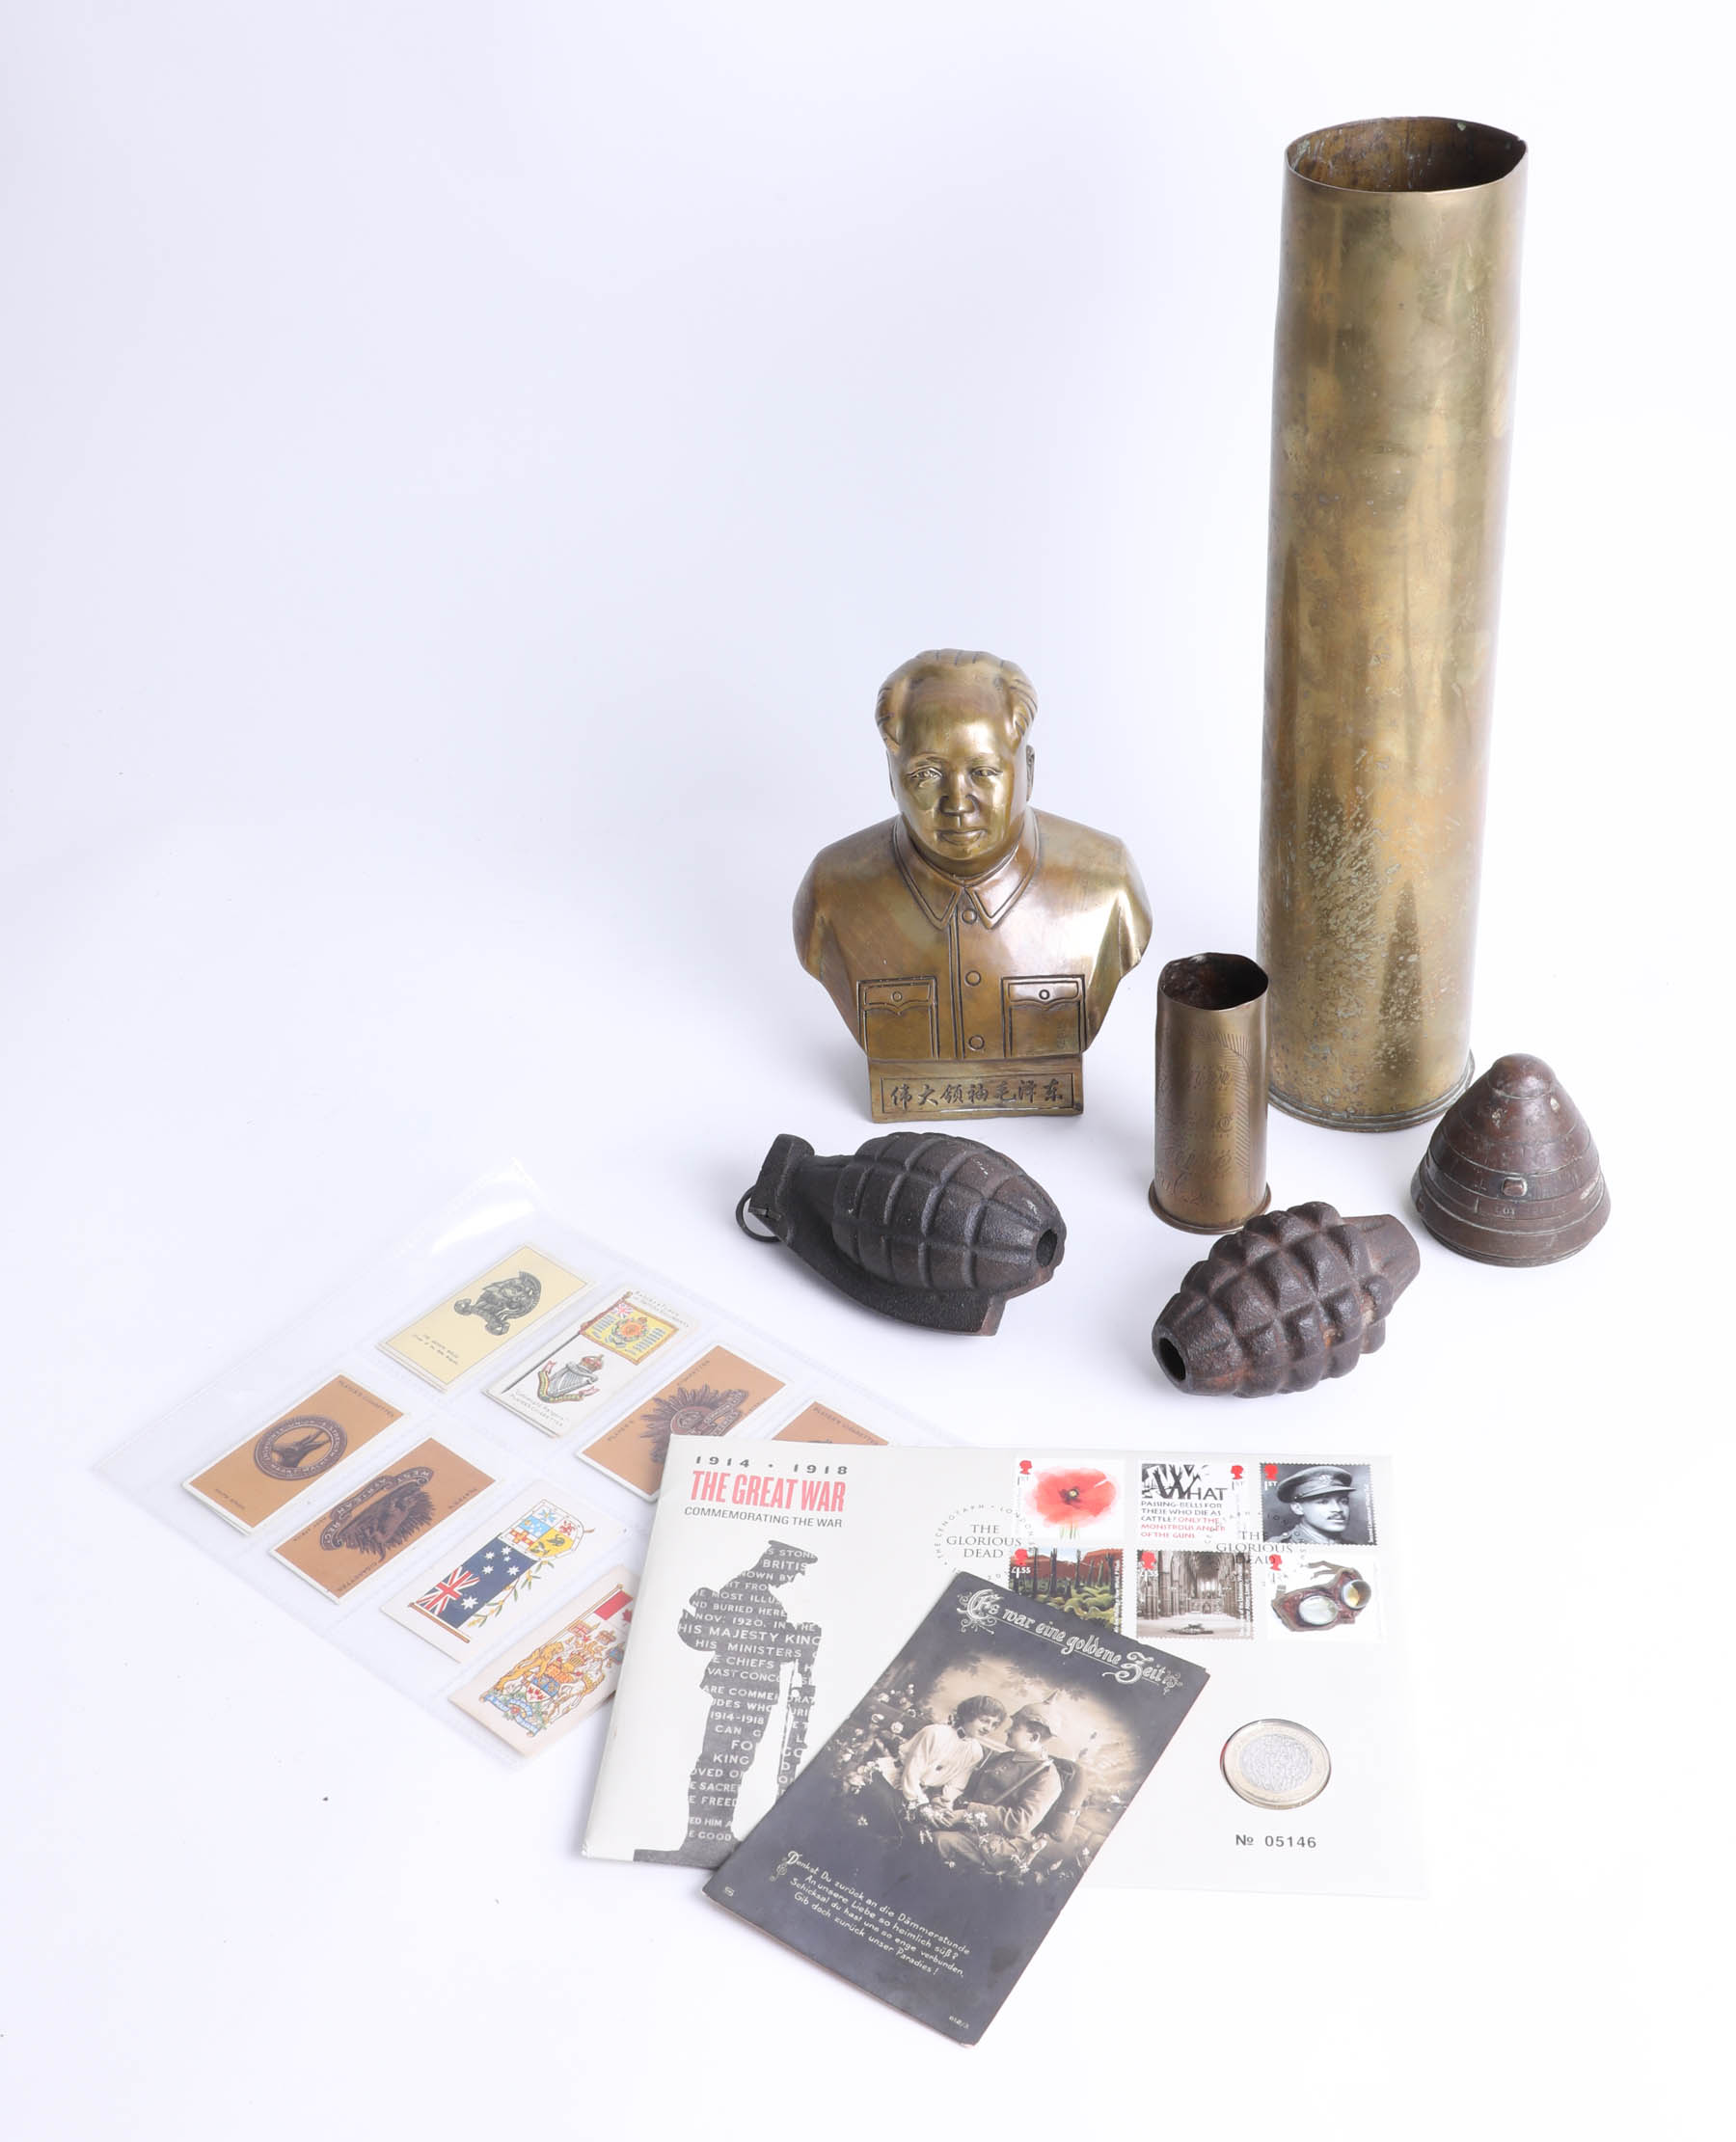 A collection of inert hand grenades, shell case and a brass bust of mayo Mao Tse Tung, some